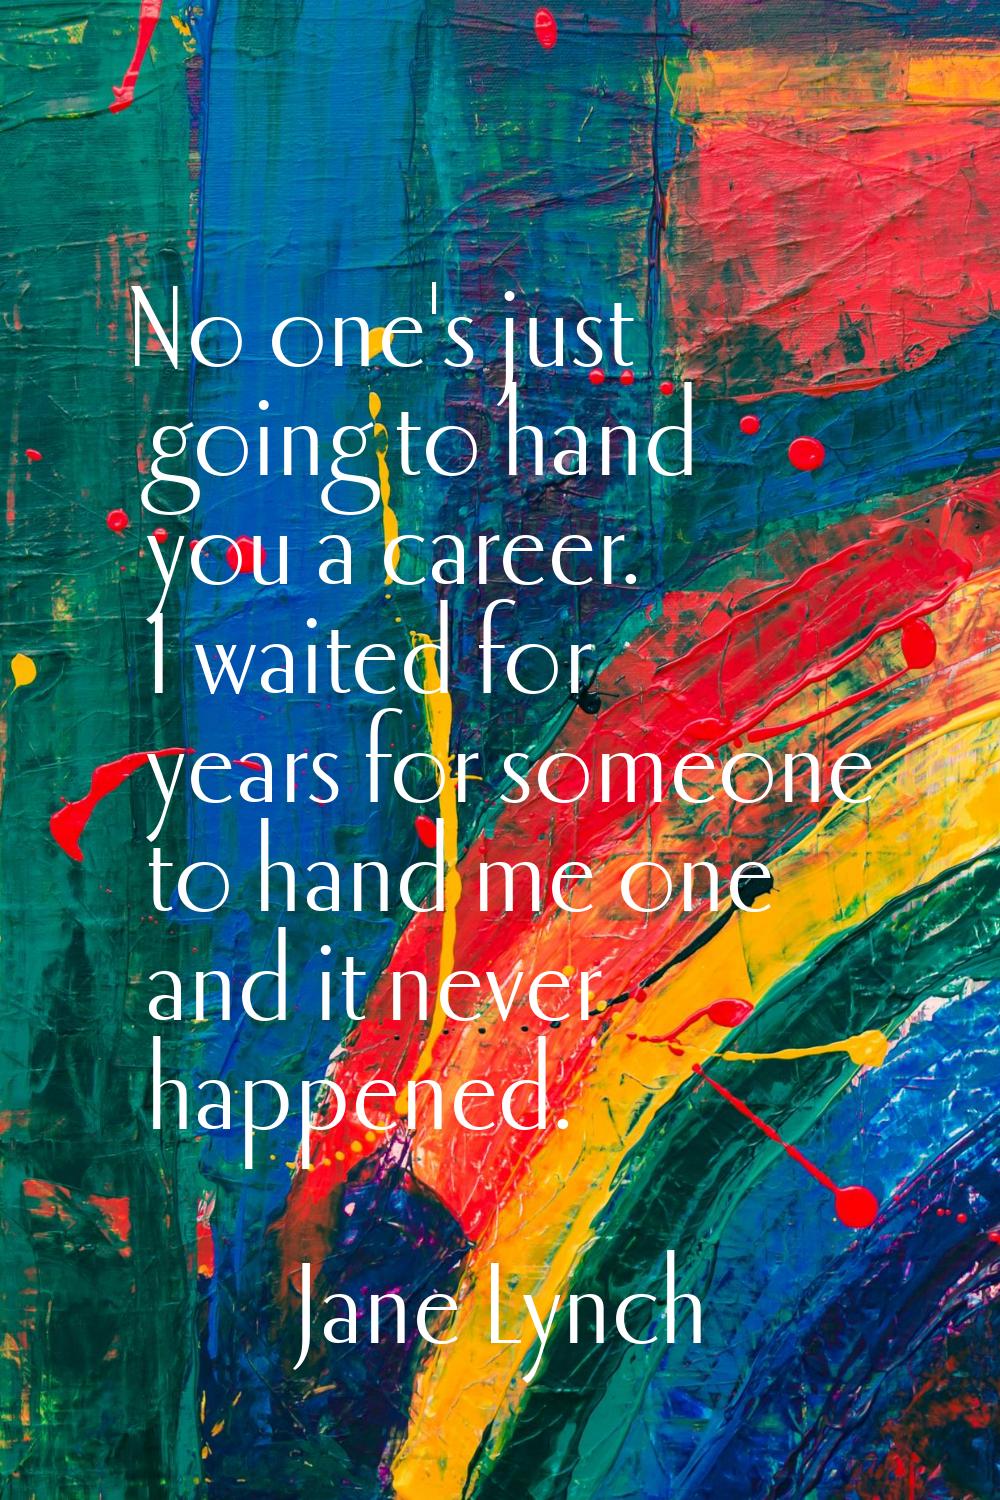 No one's just going to hand you a career. I waited for years for someone to hand me one and it neve